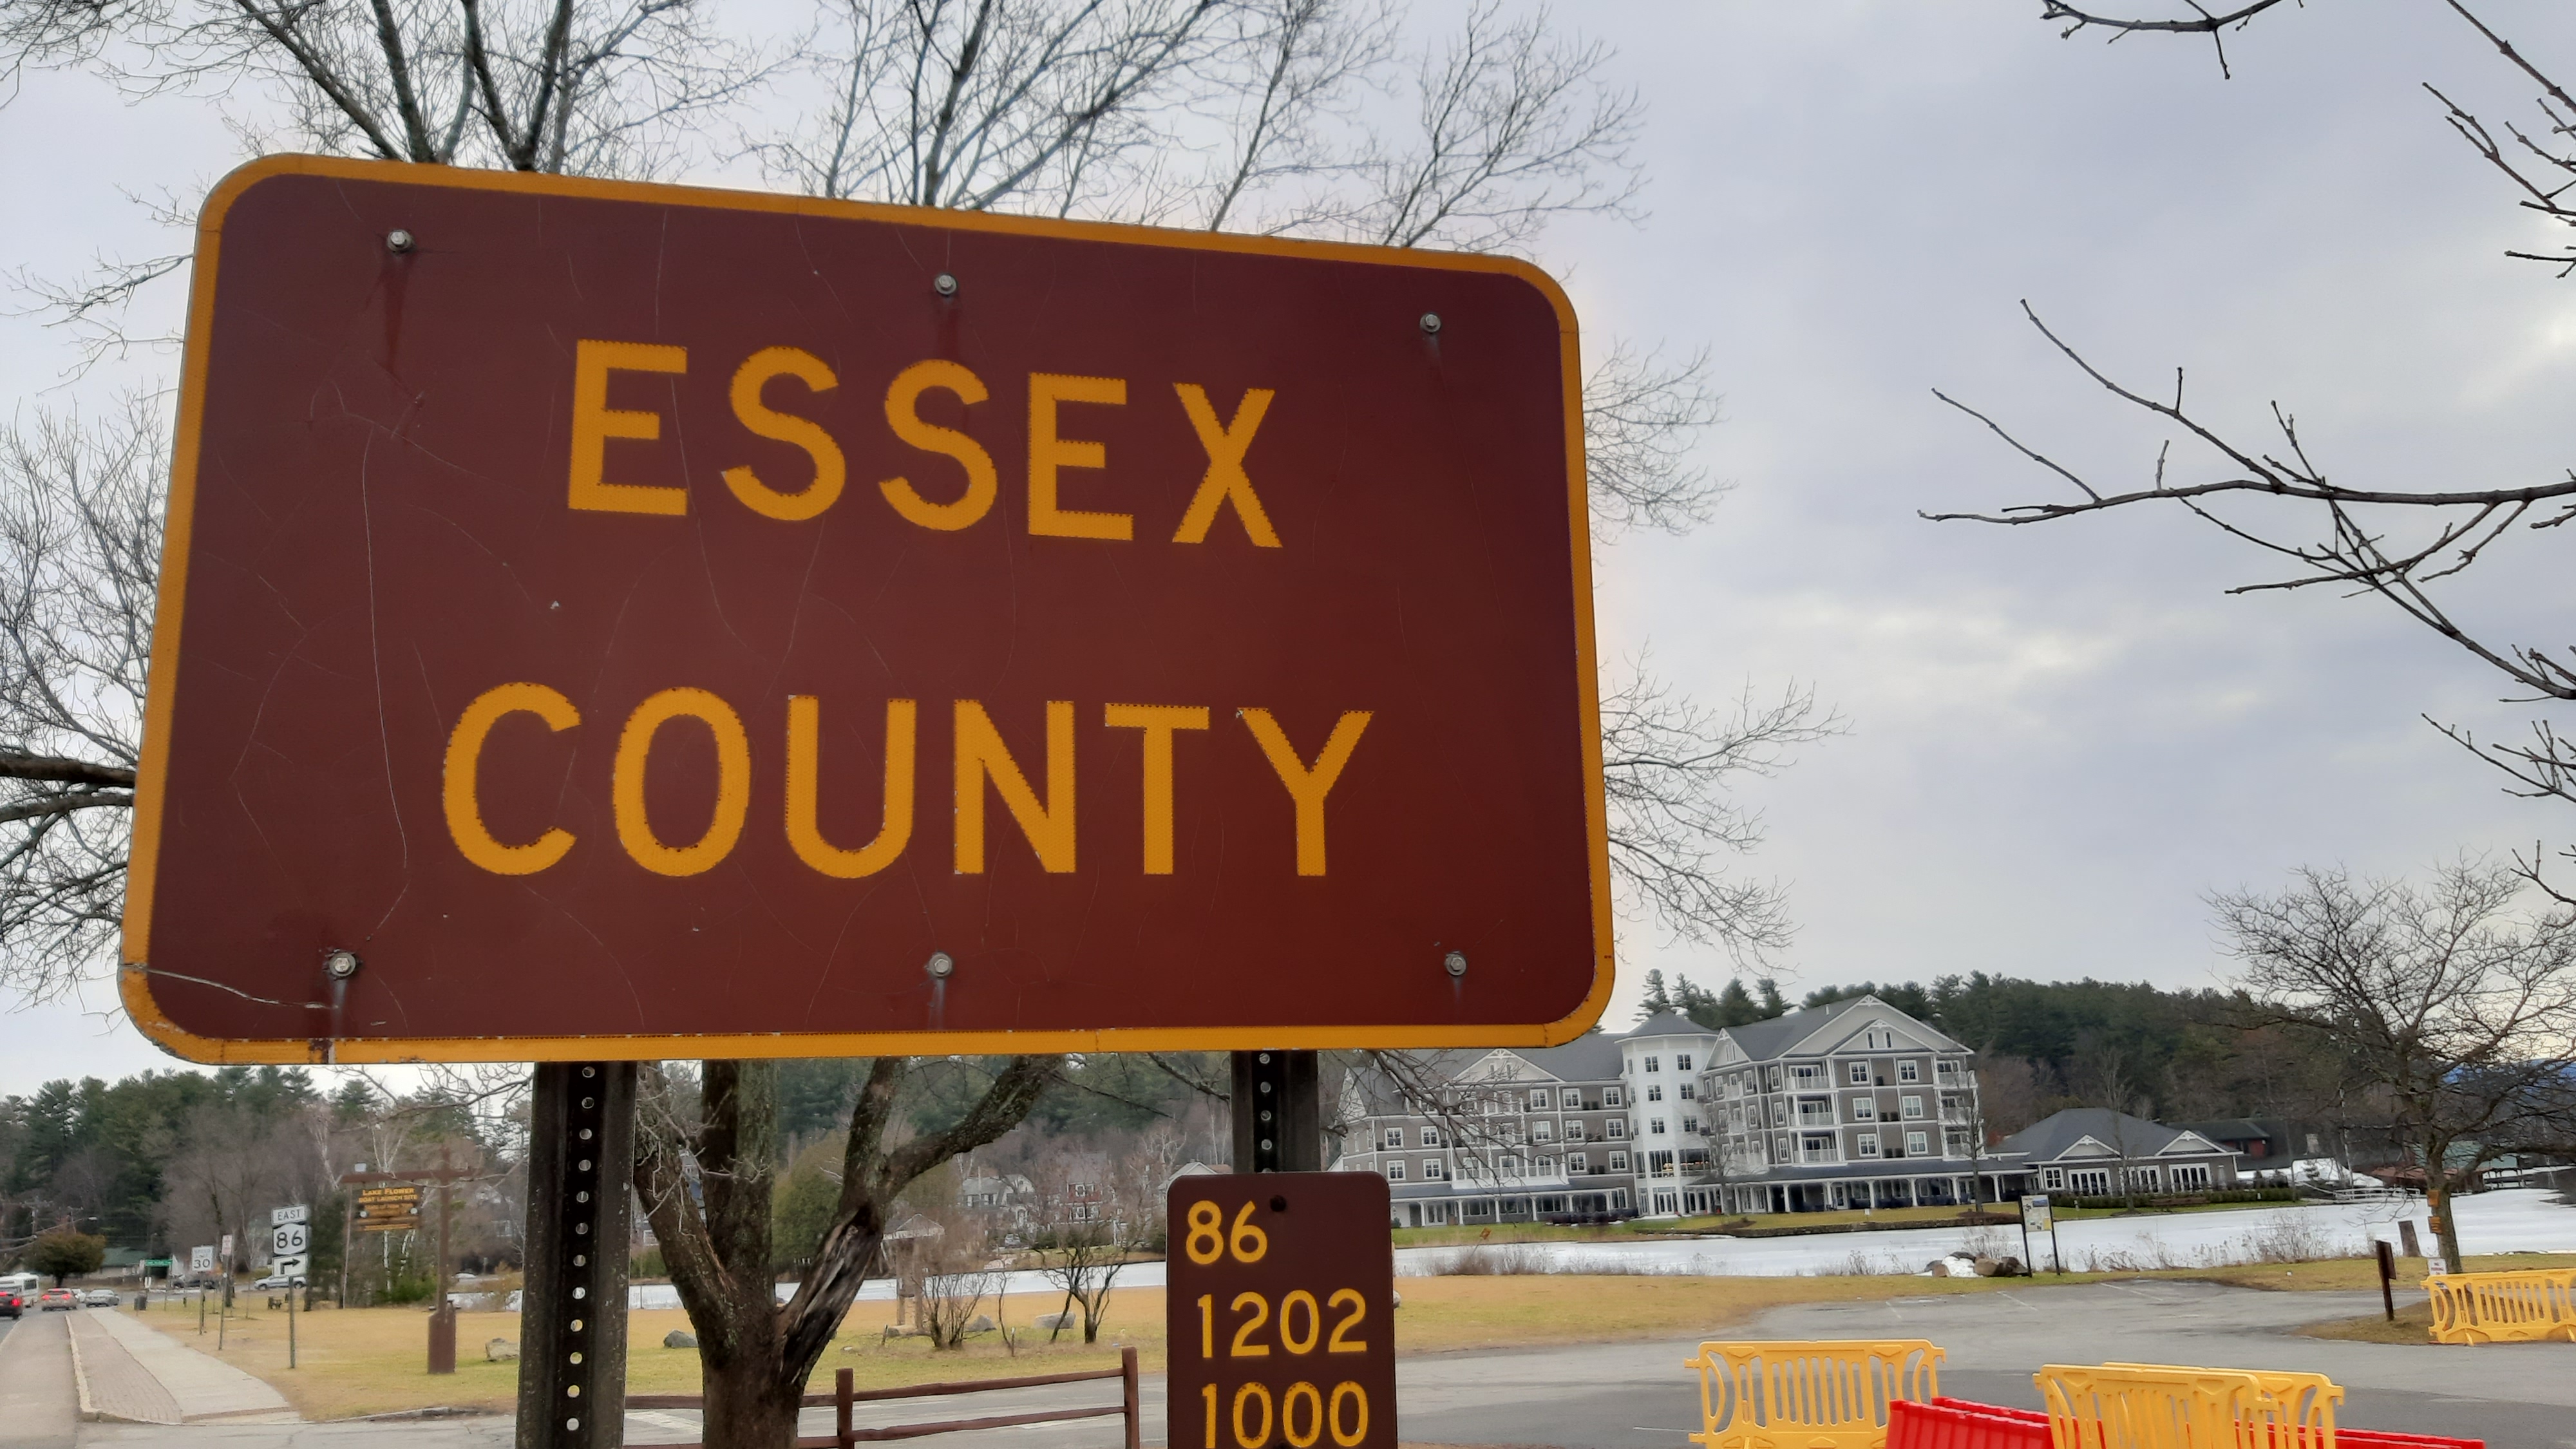 Essex County sign